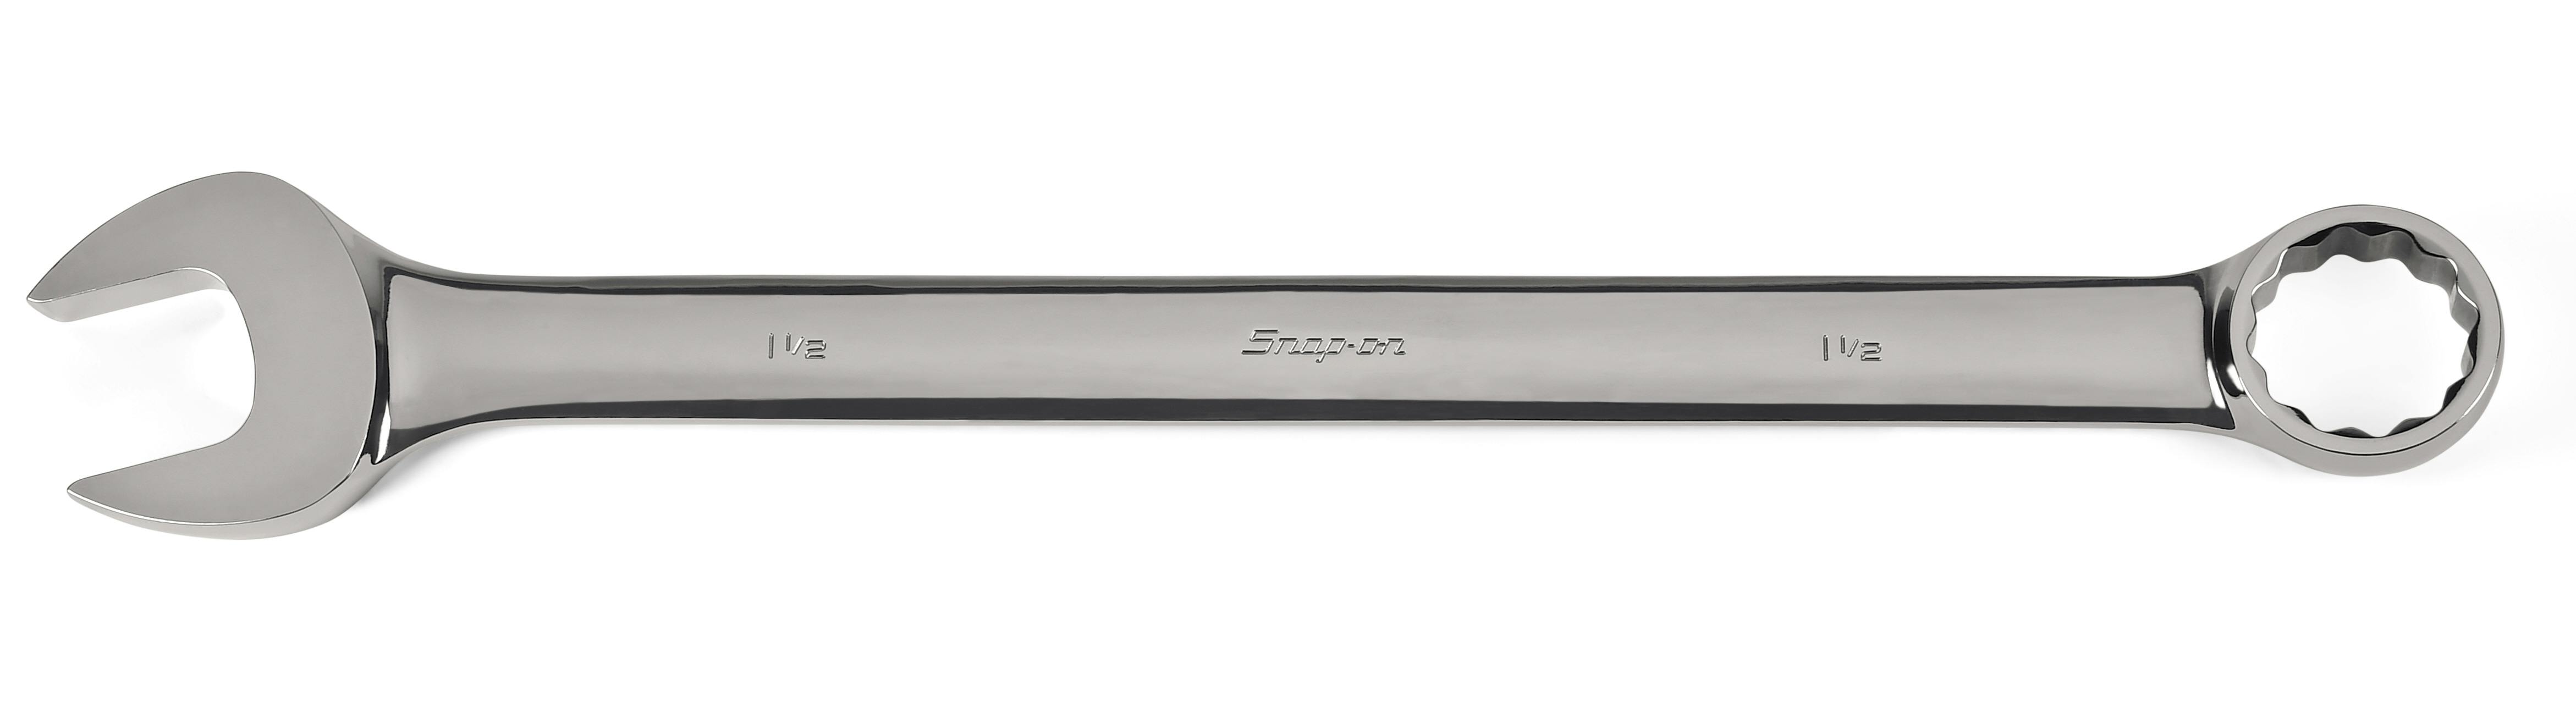 SNAP ON GOEX12B  3/8" 12-Point SAE Flank Drive® Standard Combination Wrench